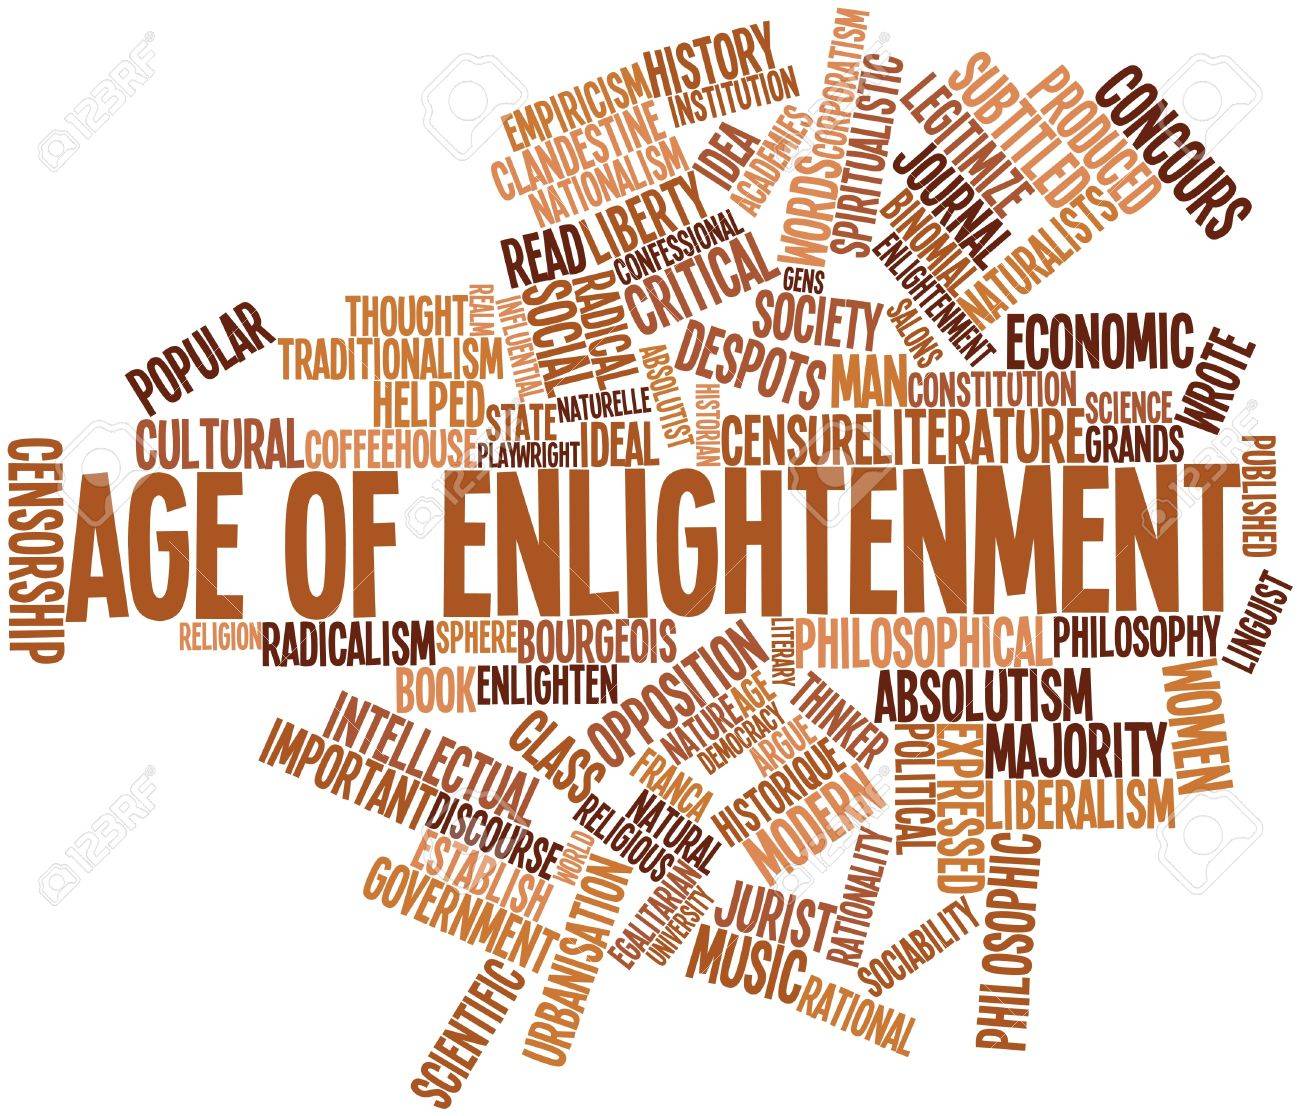 REVOLUTION AND THE ENLIGHTENMENT Module 3 and 5